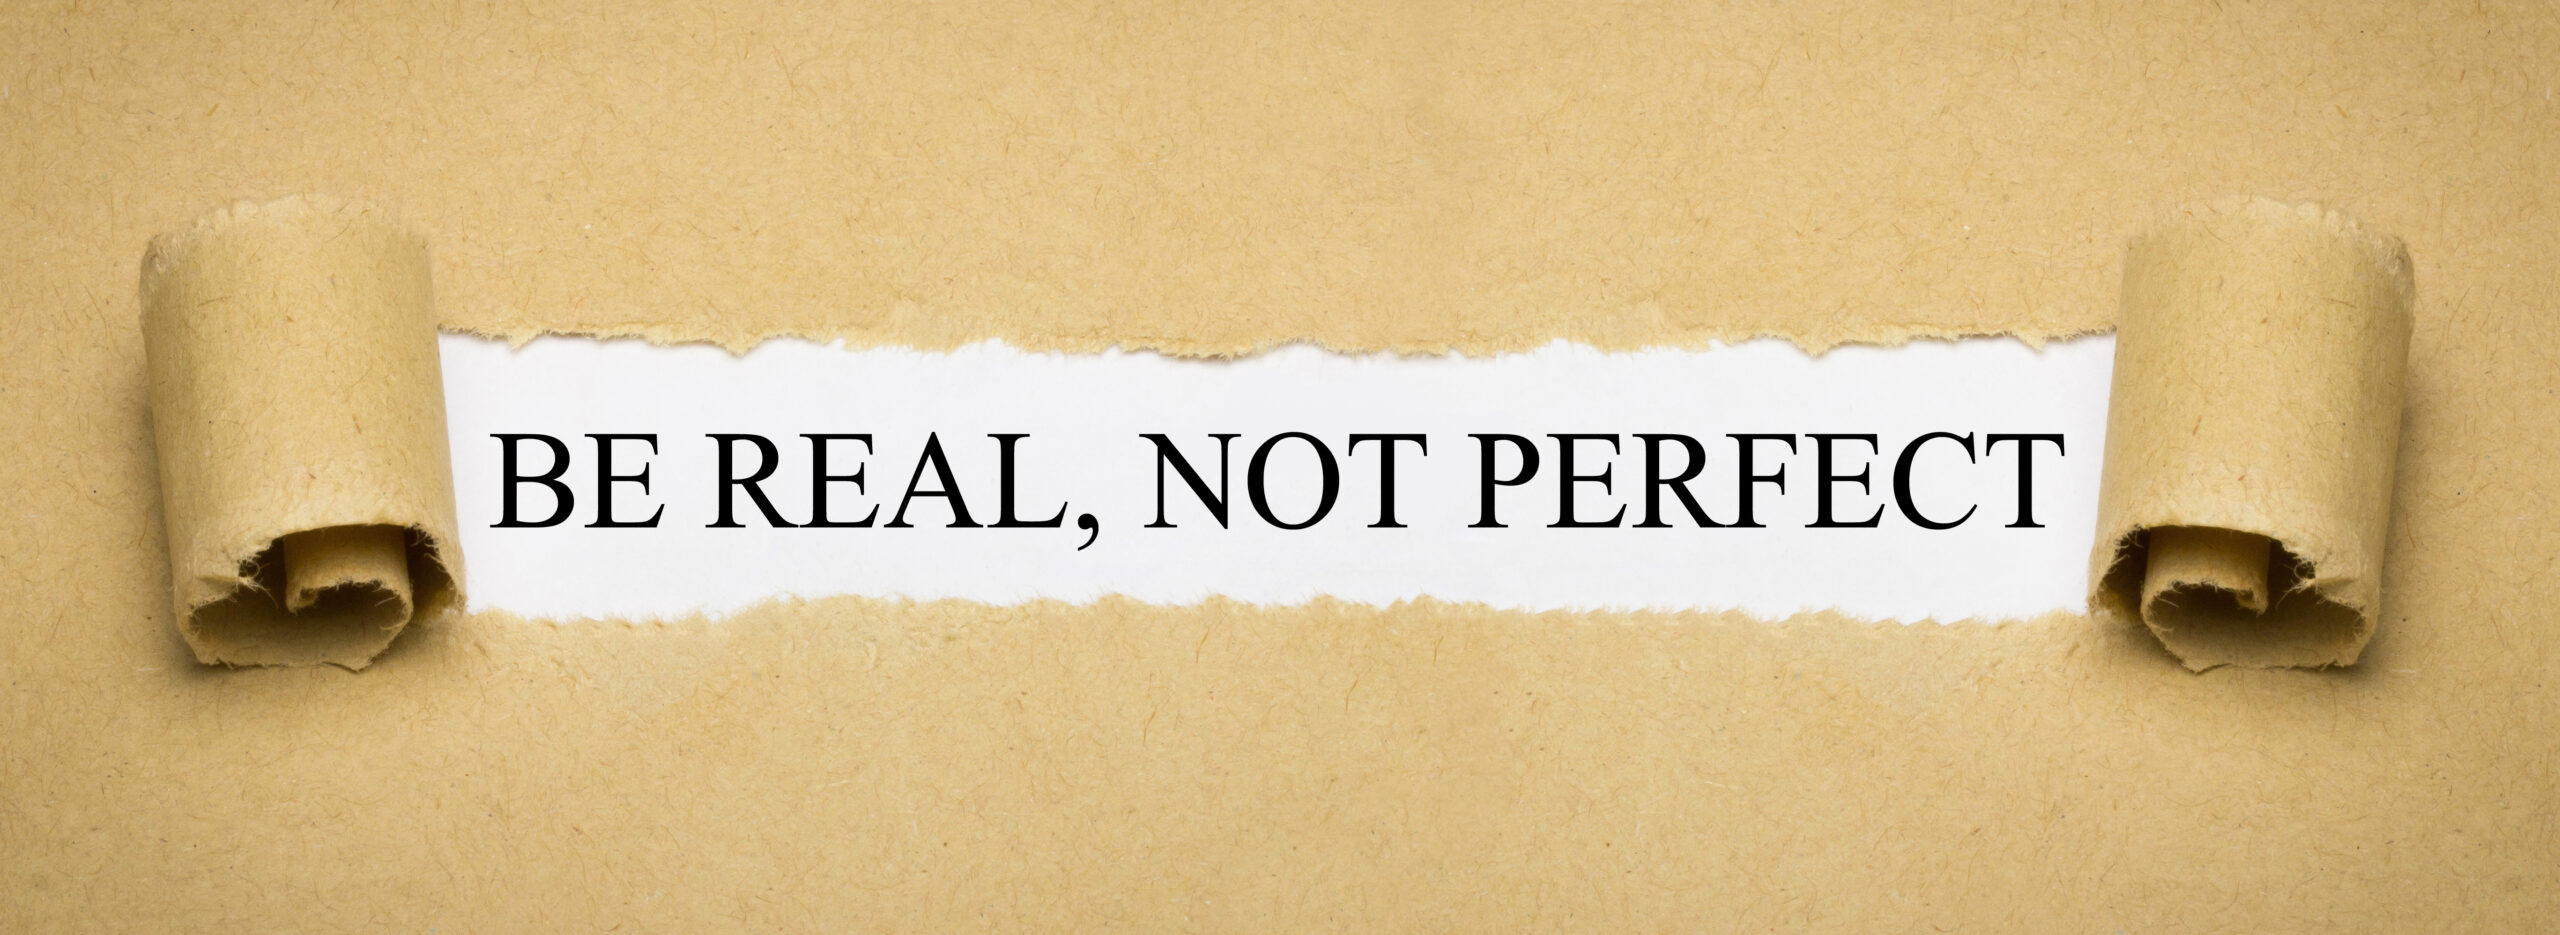 Authenticity. Be Real. Not Perfect.